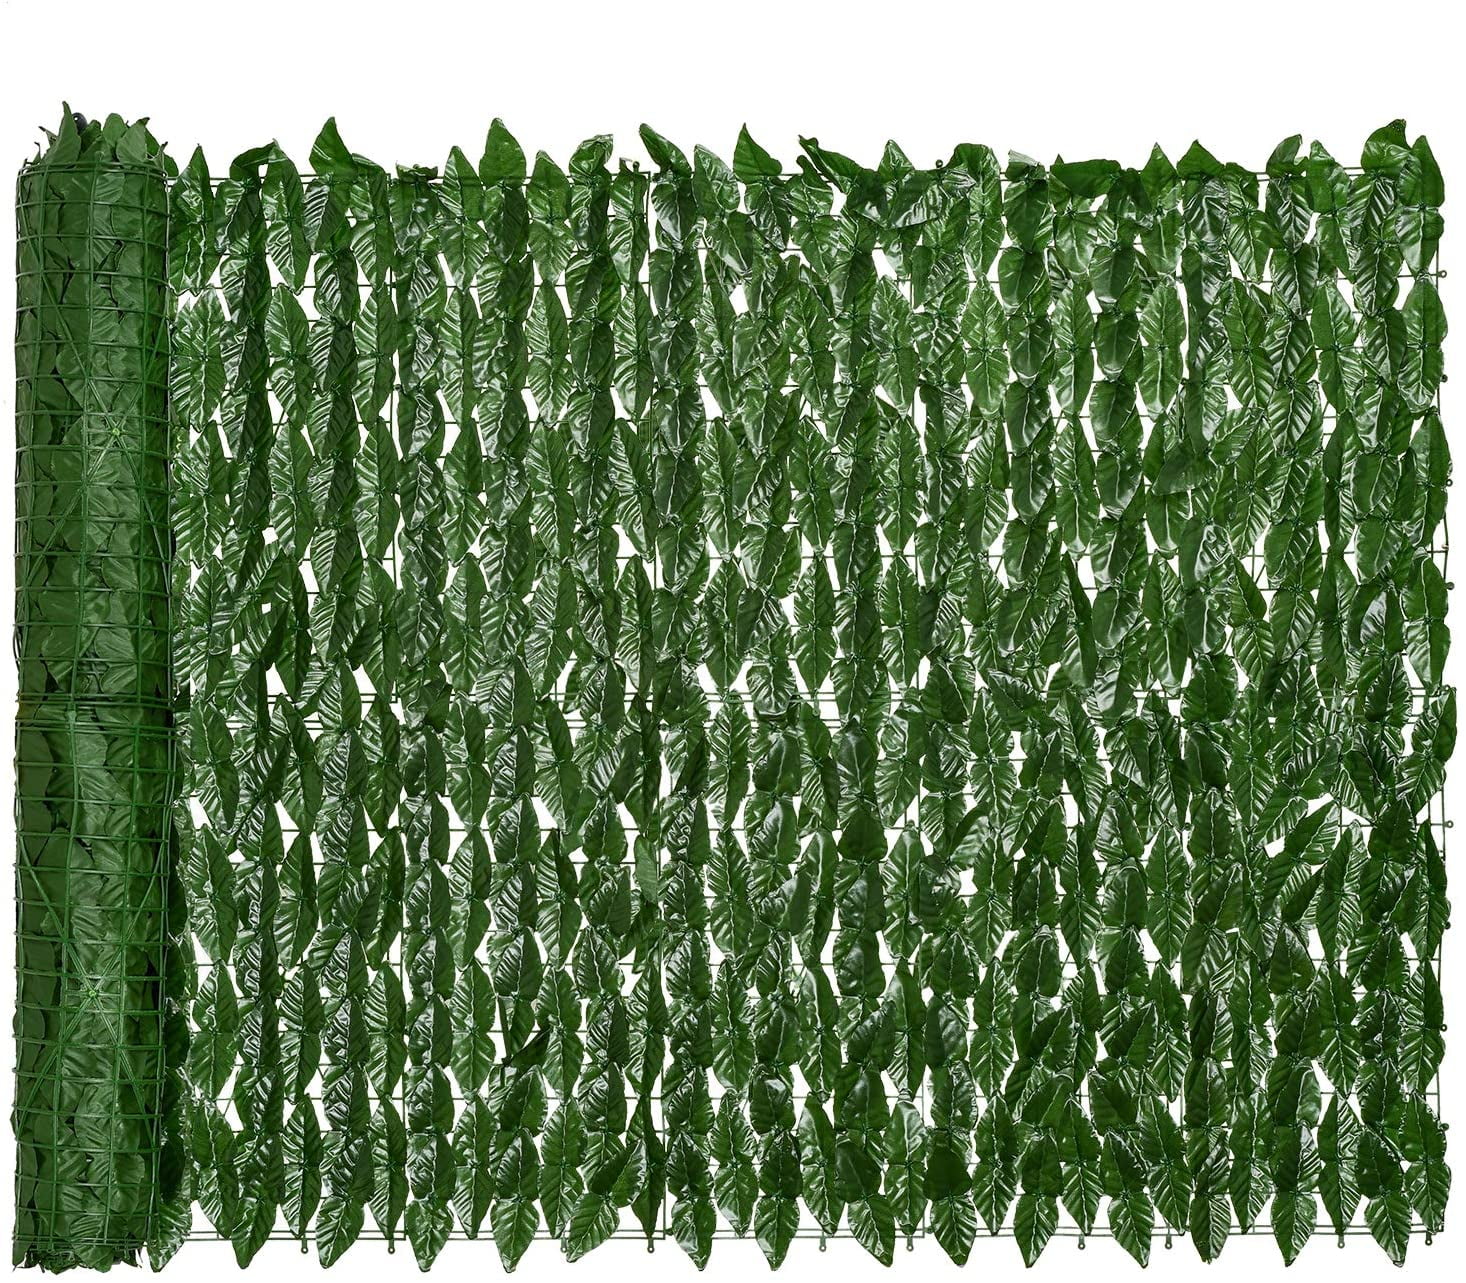 118''x39'' Artificial Faux Ivy Leaf Garden Privacy Fence Panel Screen Hedge US 